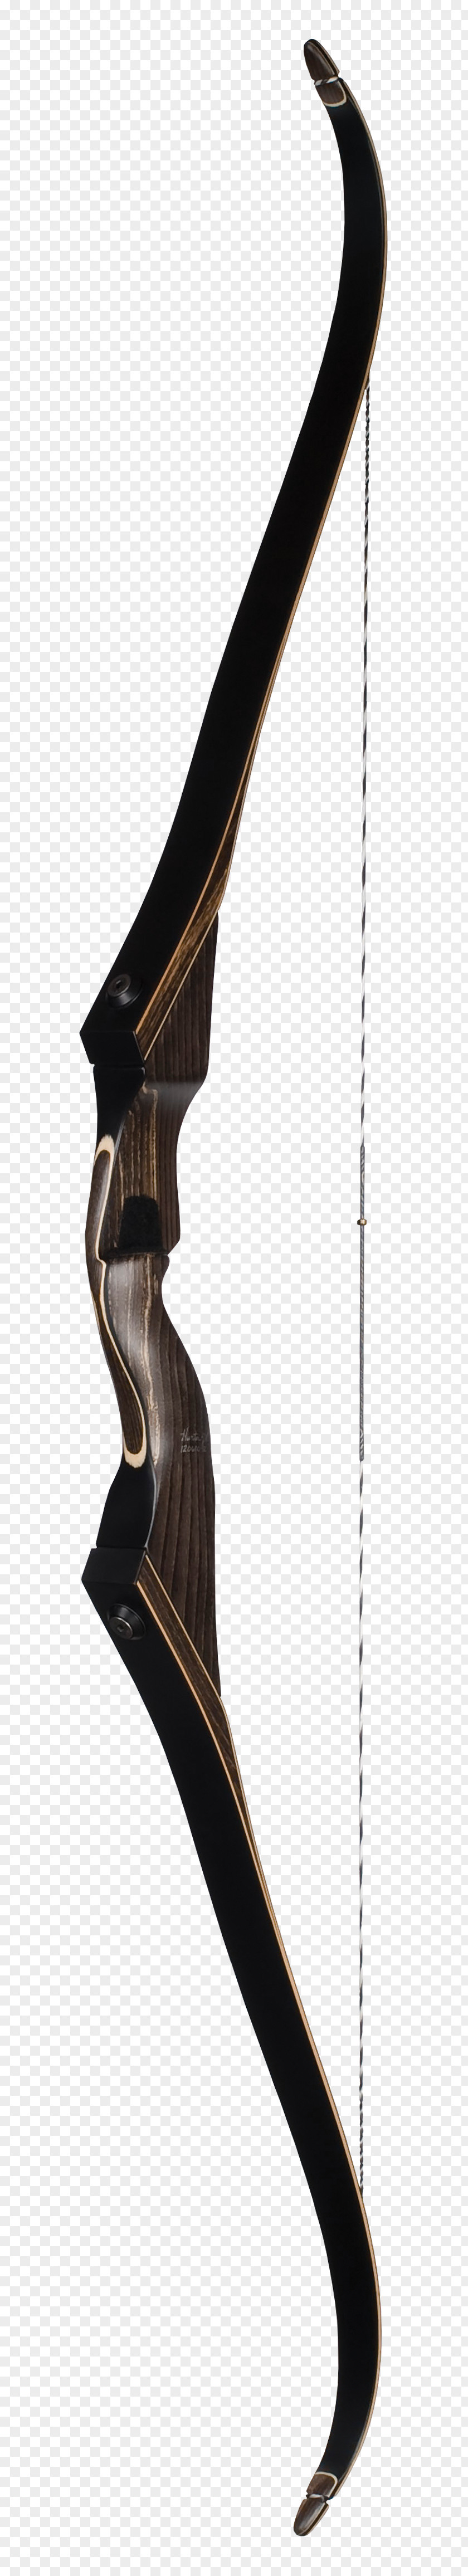 Predator Recurve Bow Hunting And Arrow Laminated PNG